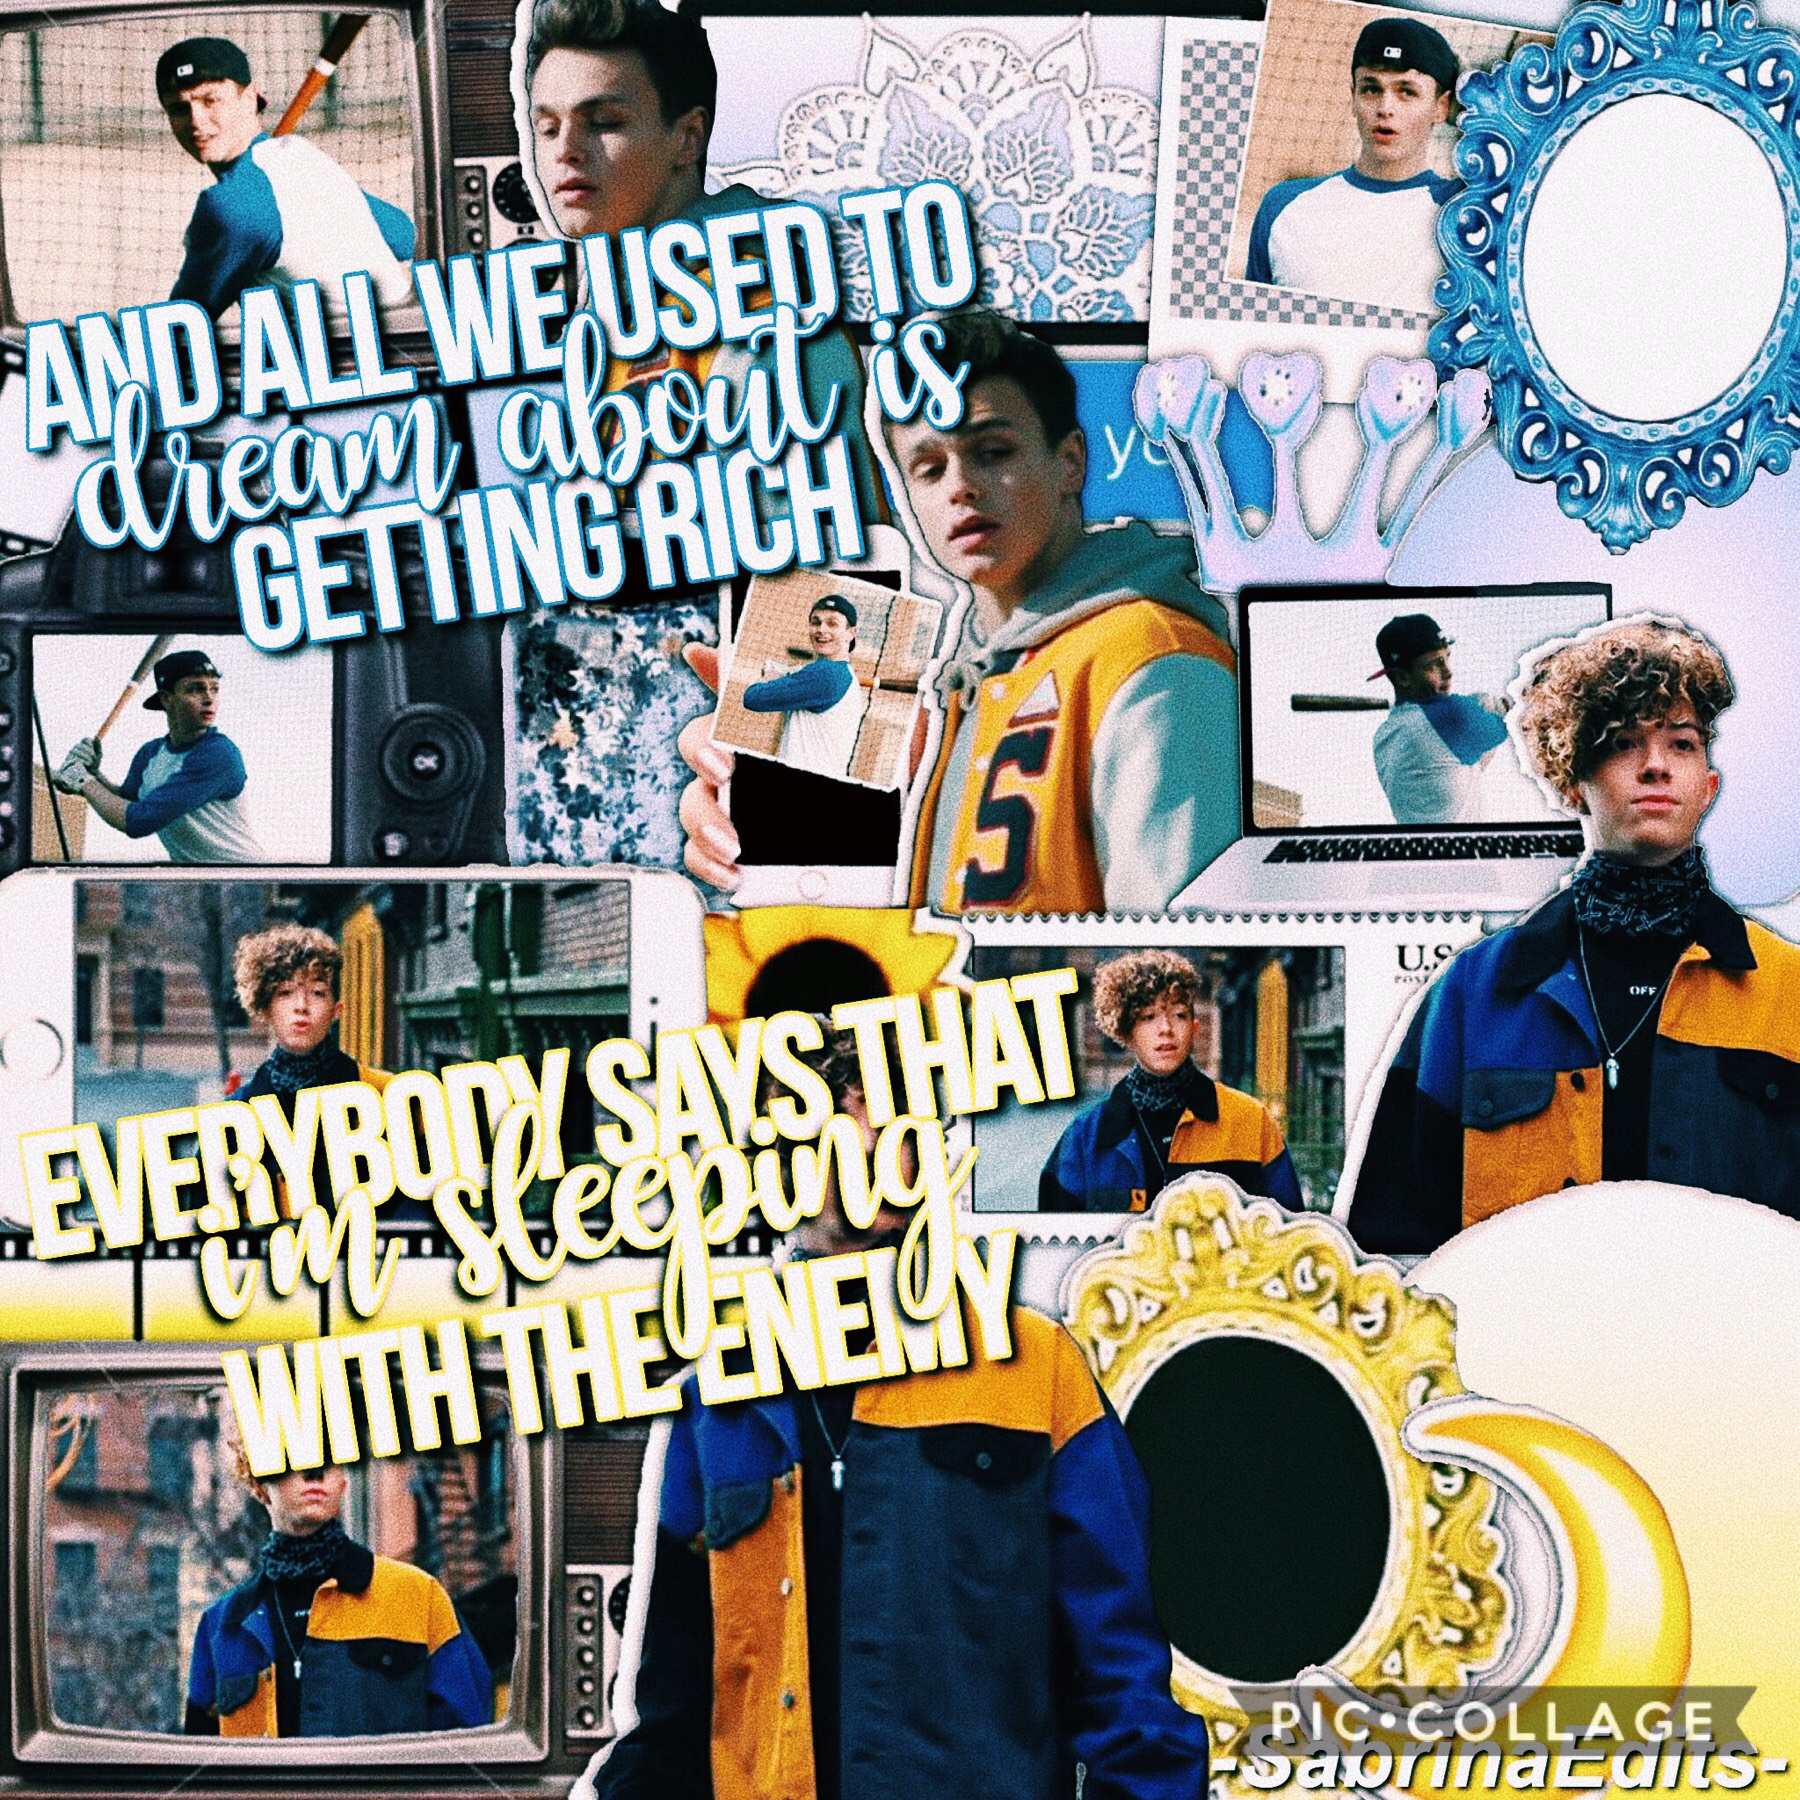 💙💛 TAP HERE 💛💙 
Credits to my good friend @Itz-Mikayla for the Text format ✨

i hope you guys like this edit, it took me half an hour 💛
Love you guys! 